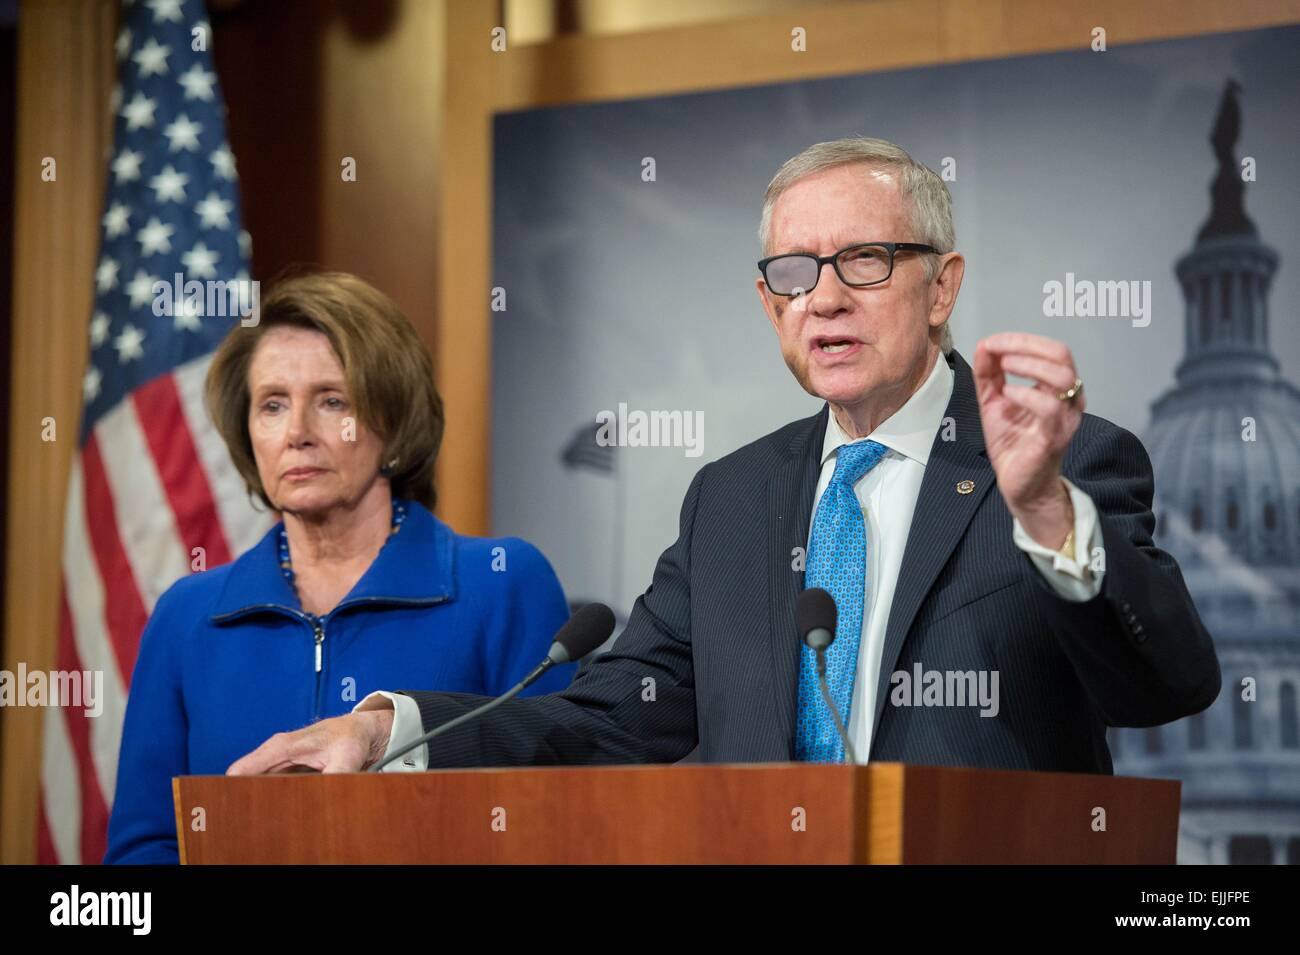 US Democratic Senate Leader Harry Reid wears medical glasses over his injured eye during a press conference as House Minority leader Nancy Pelosi looks on February 26, 2015 in Washington, DC. The 75-year-old Reid suffered an accident while exercising on New Year's Day resulting in four broken ribs and may leave him permanently blind in one eye. Stock Photo